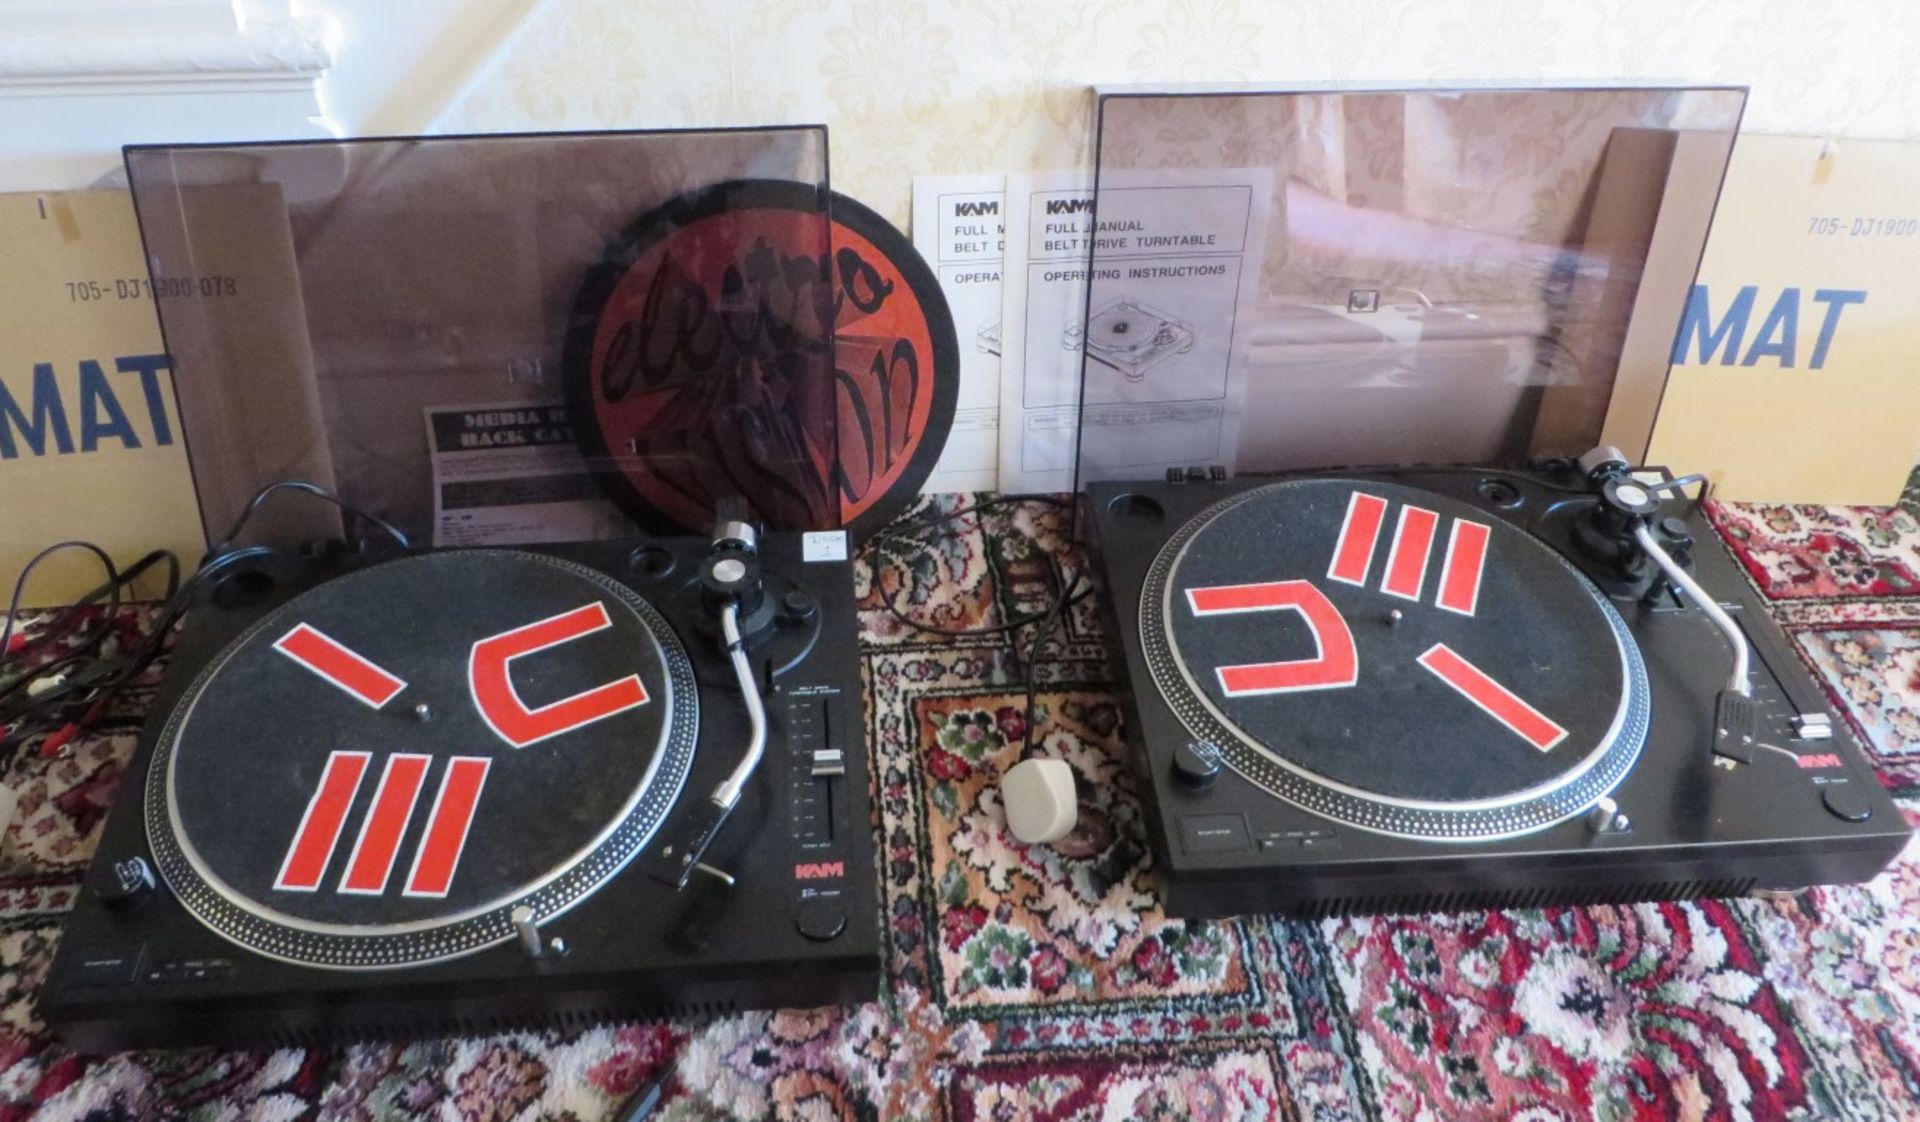 A Pair Of KAM Branded Full Manual Belt Drive Turntables / Decks - Both Preowned In Working Condition